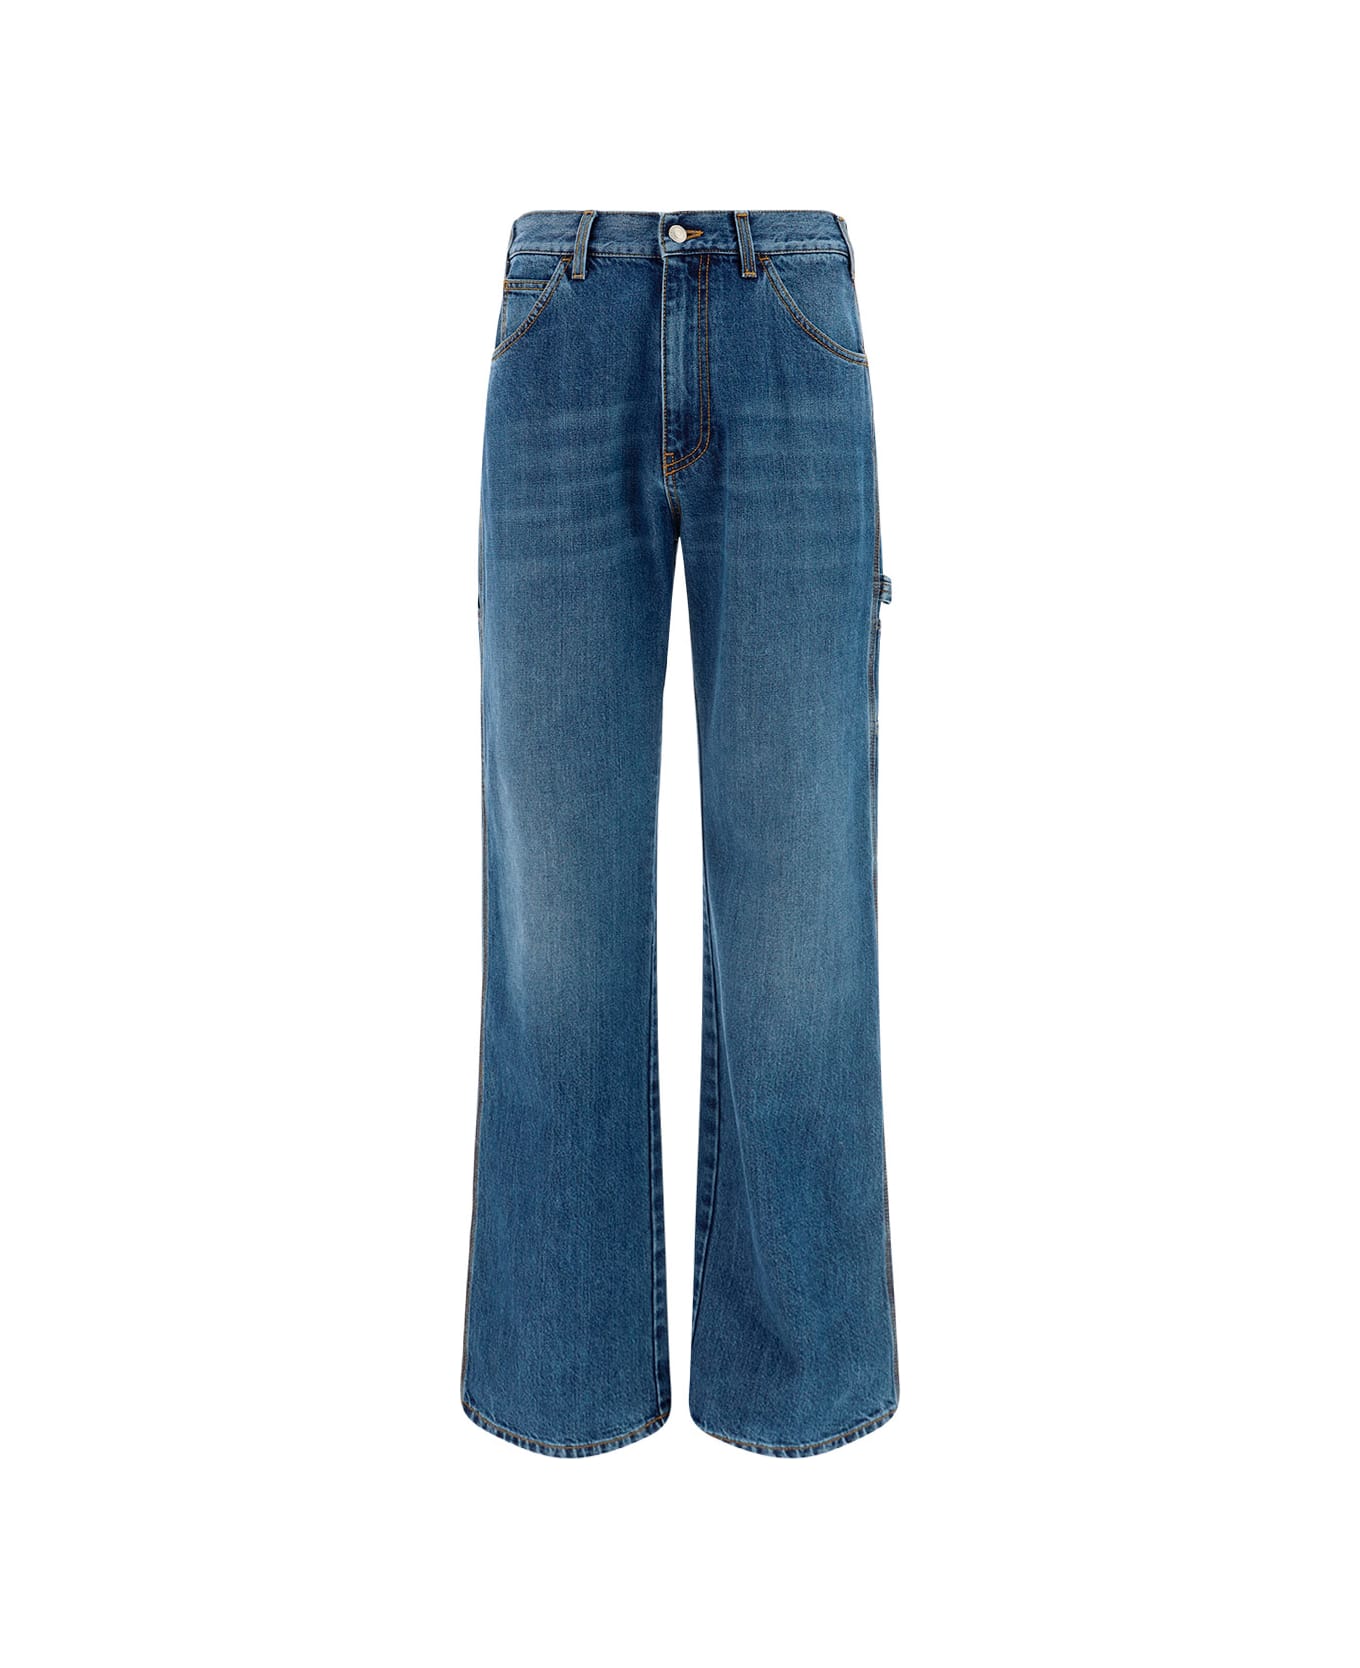 Alexander McQueen Straight Buttoned Jeans - Blue Washed デニム